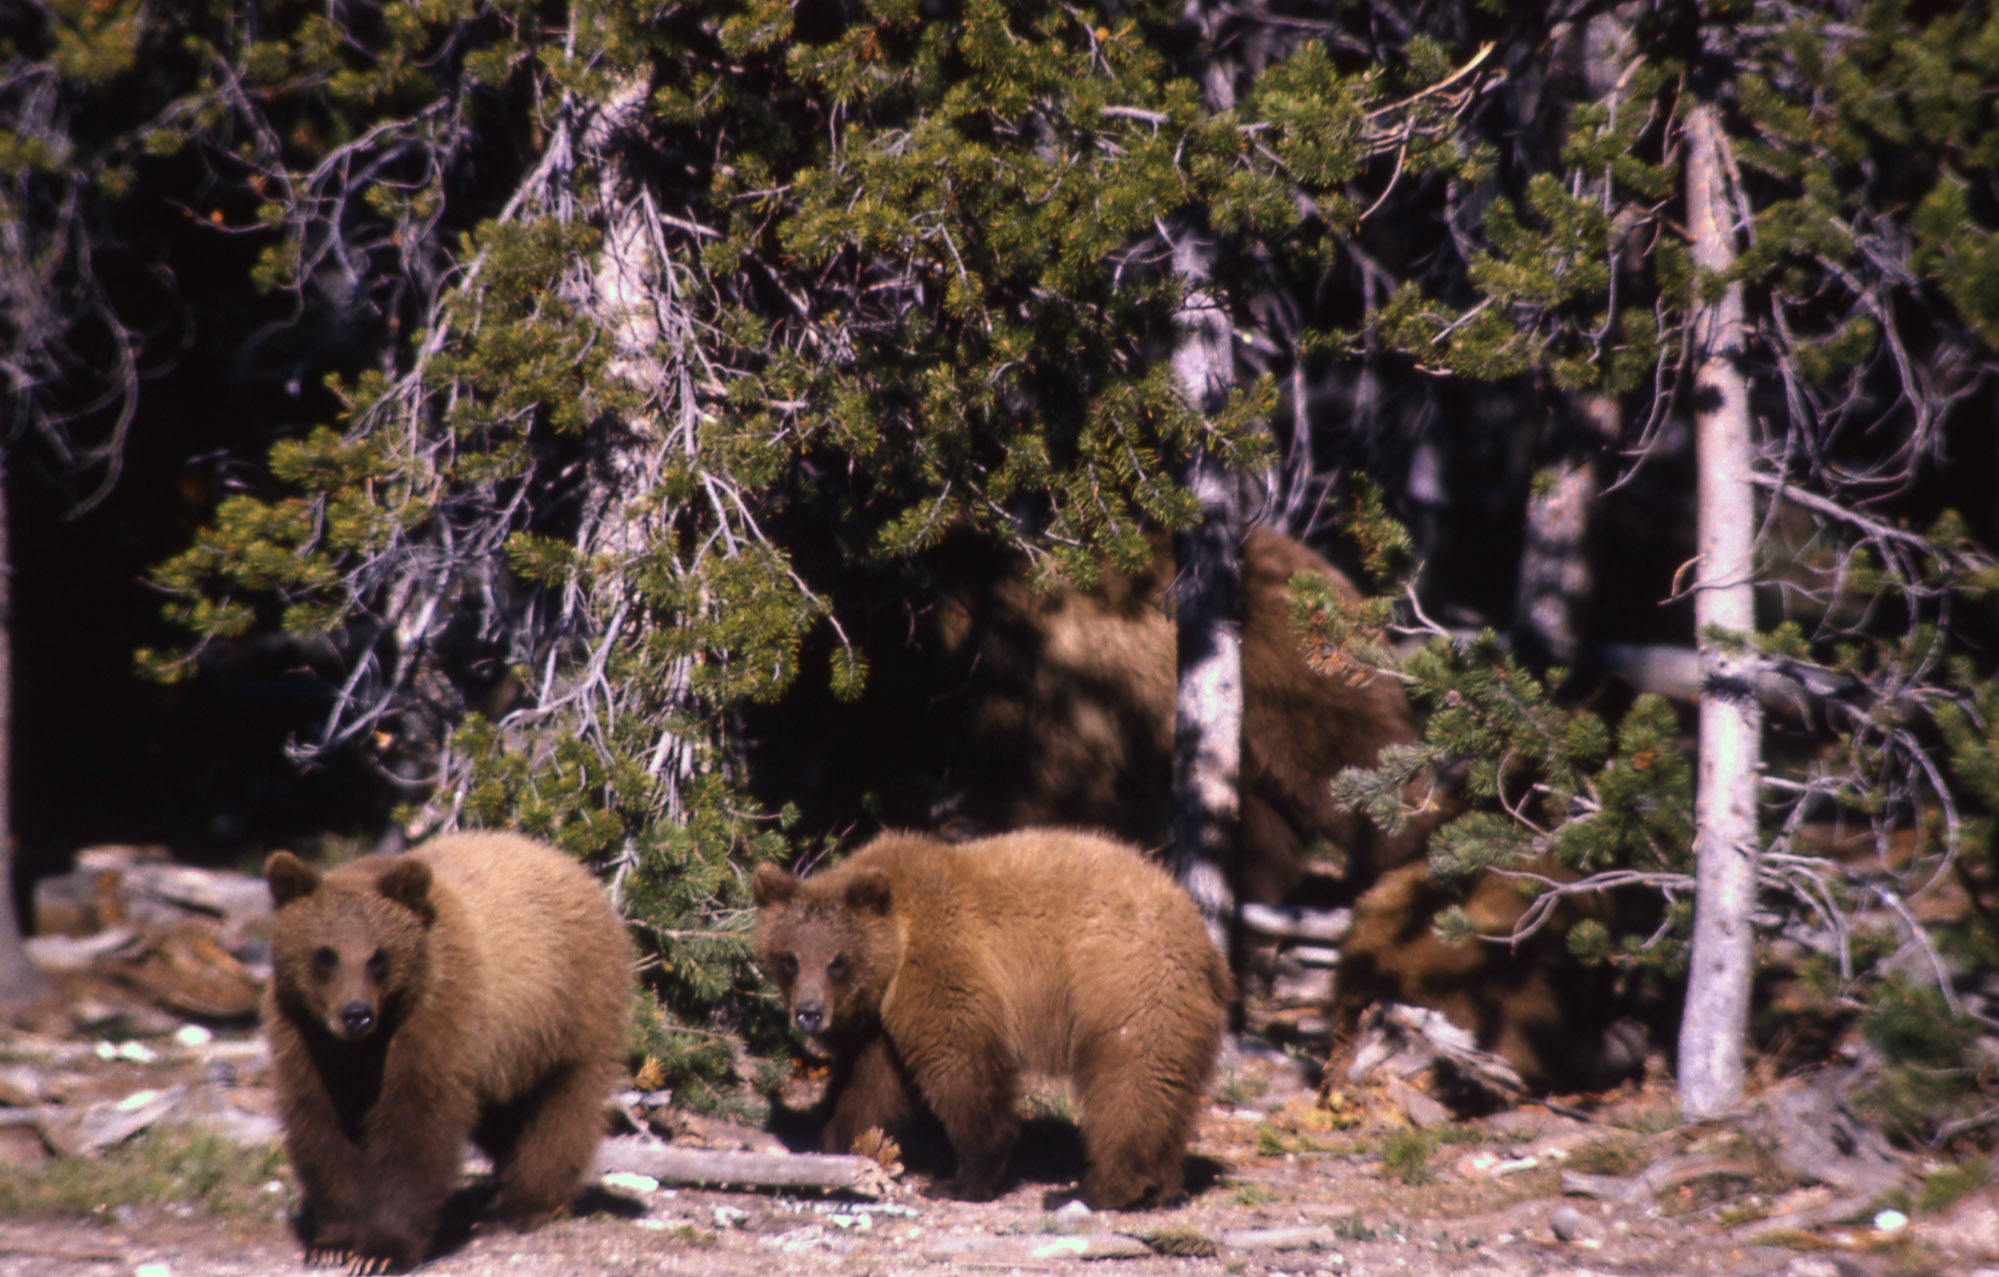 Tribes in Montana and Wyoming oppose delisting of grizzly bear